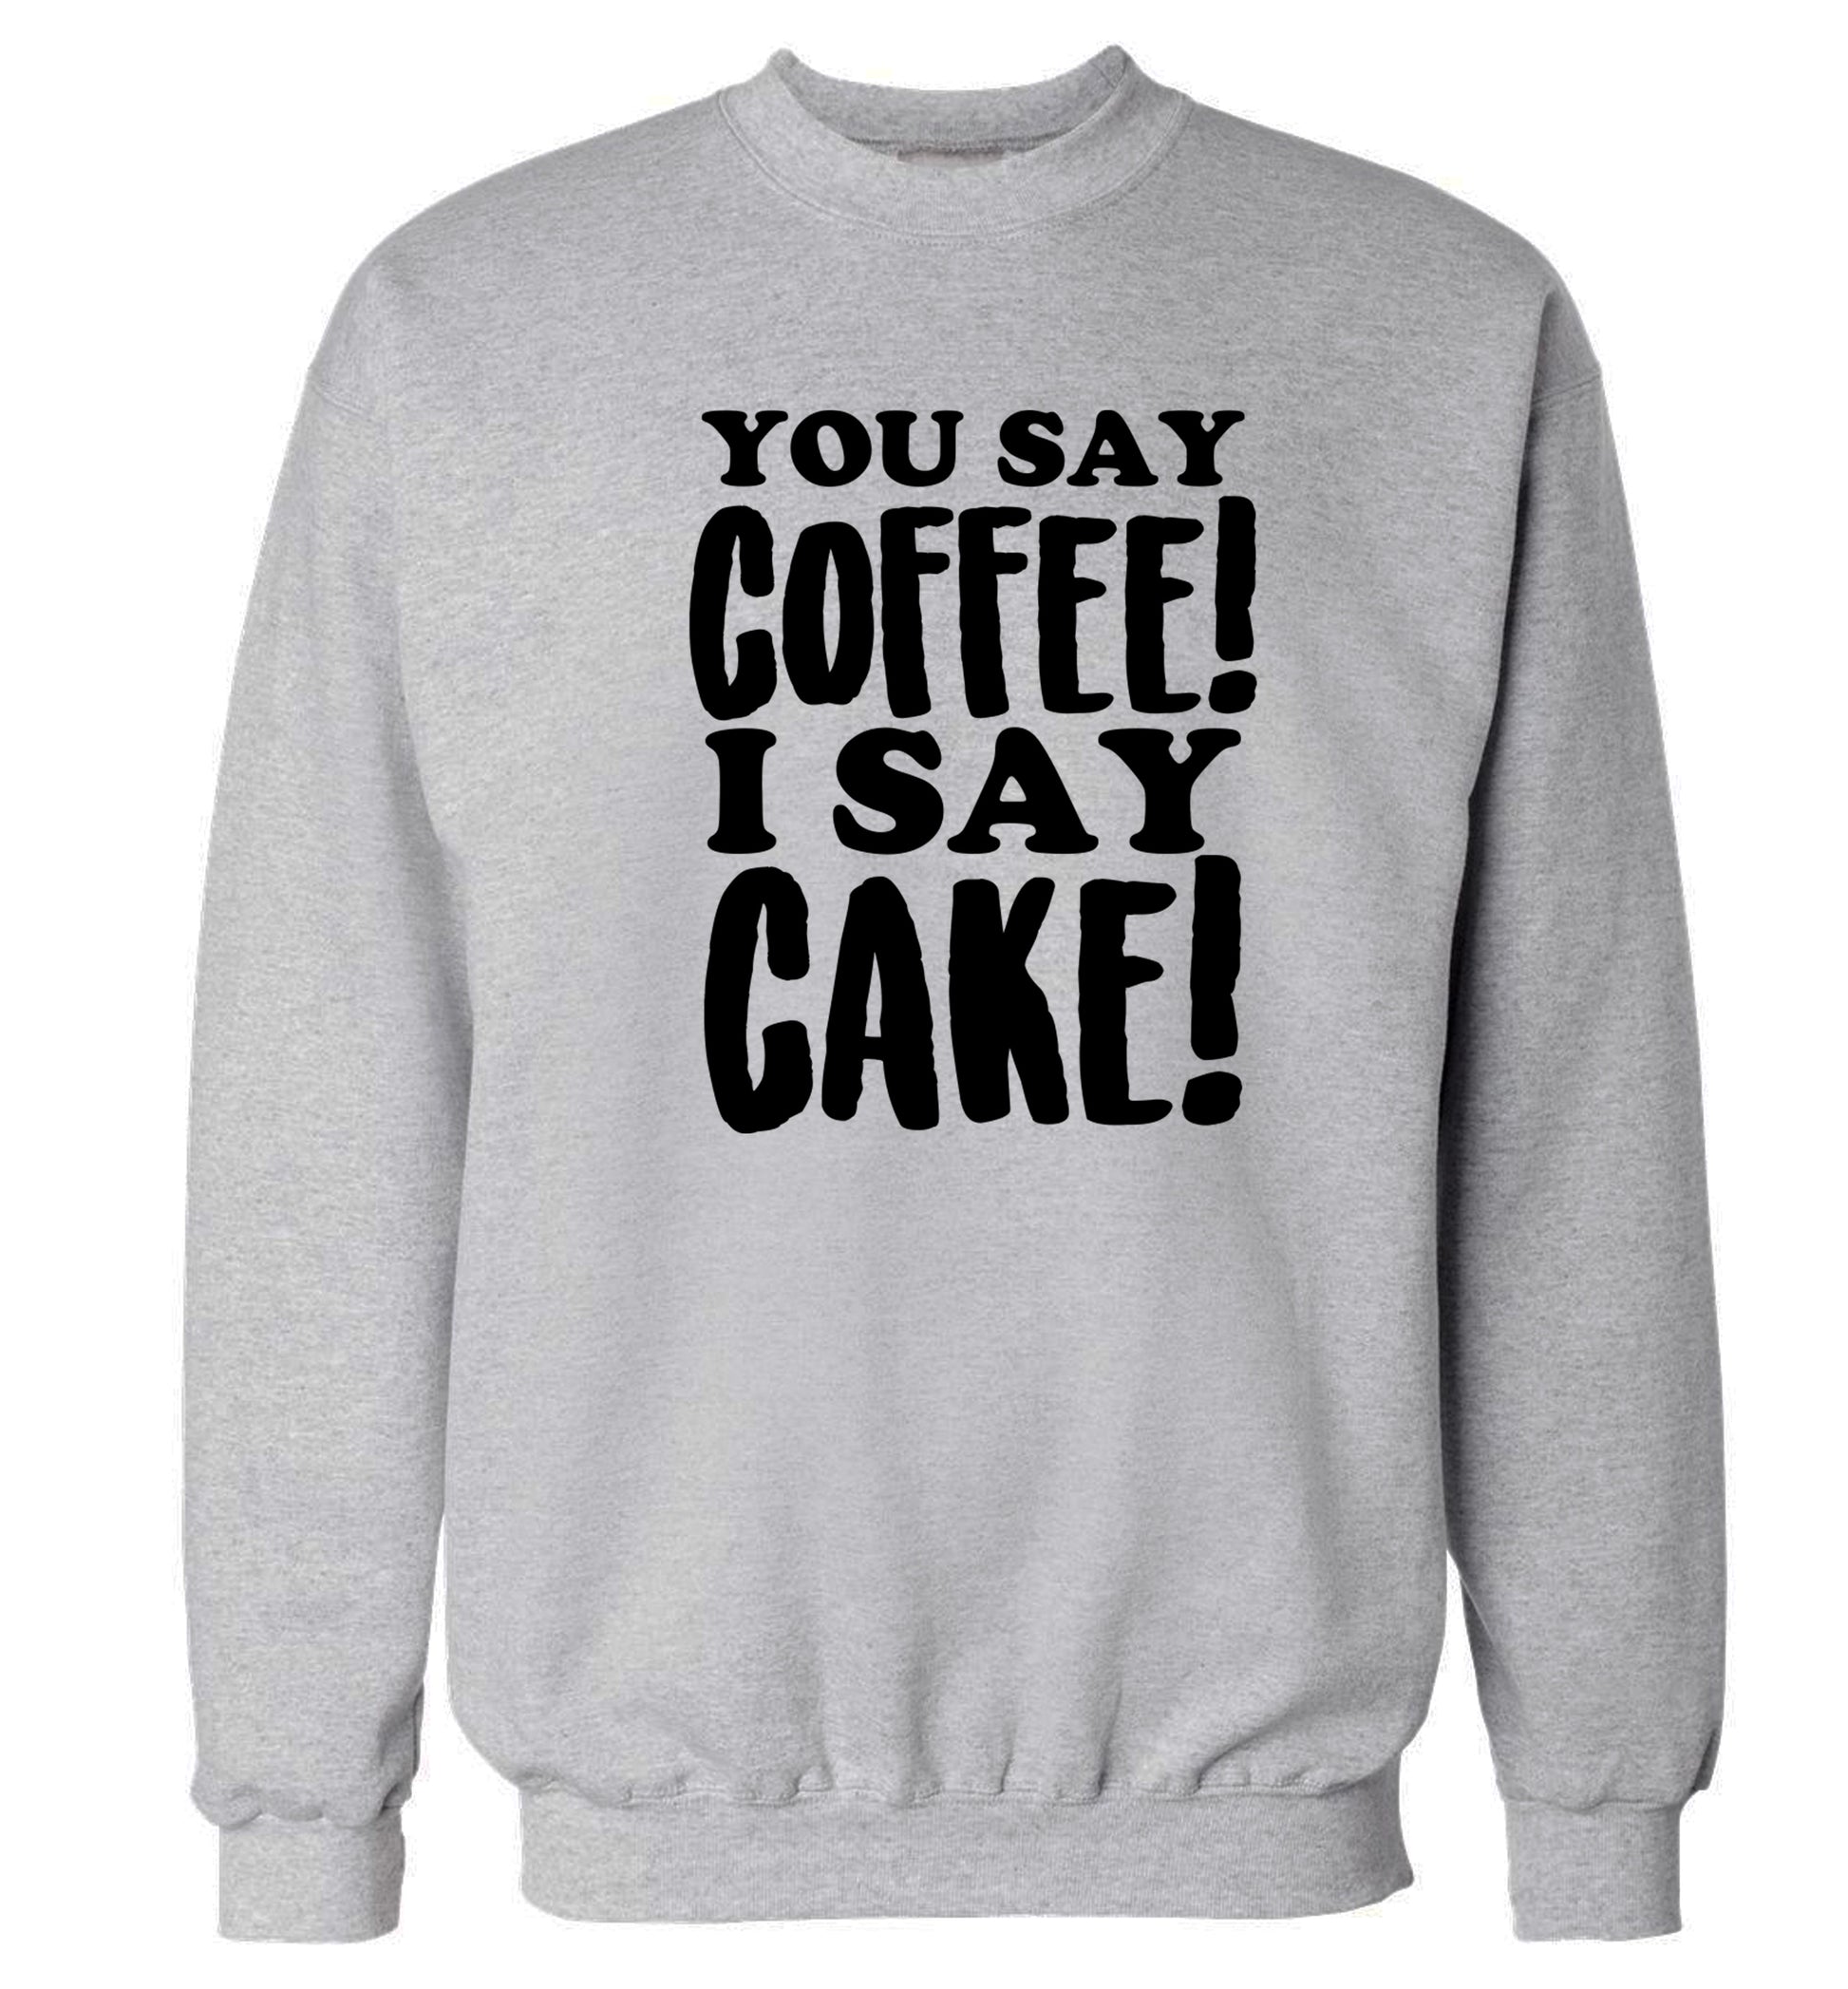 You say coffee I say cake! Adult's unisex grey Sweater 2XL